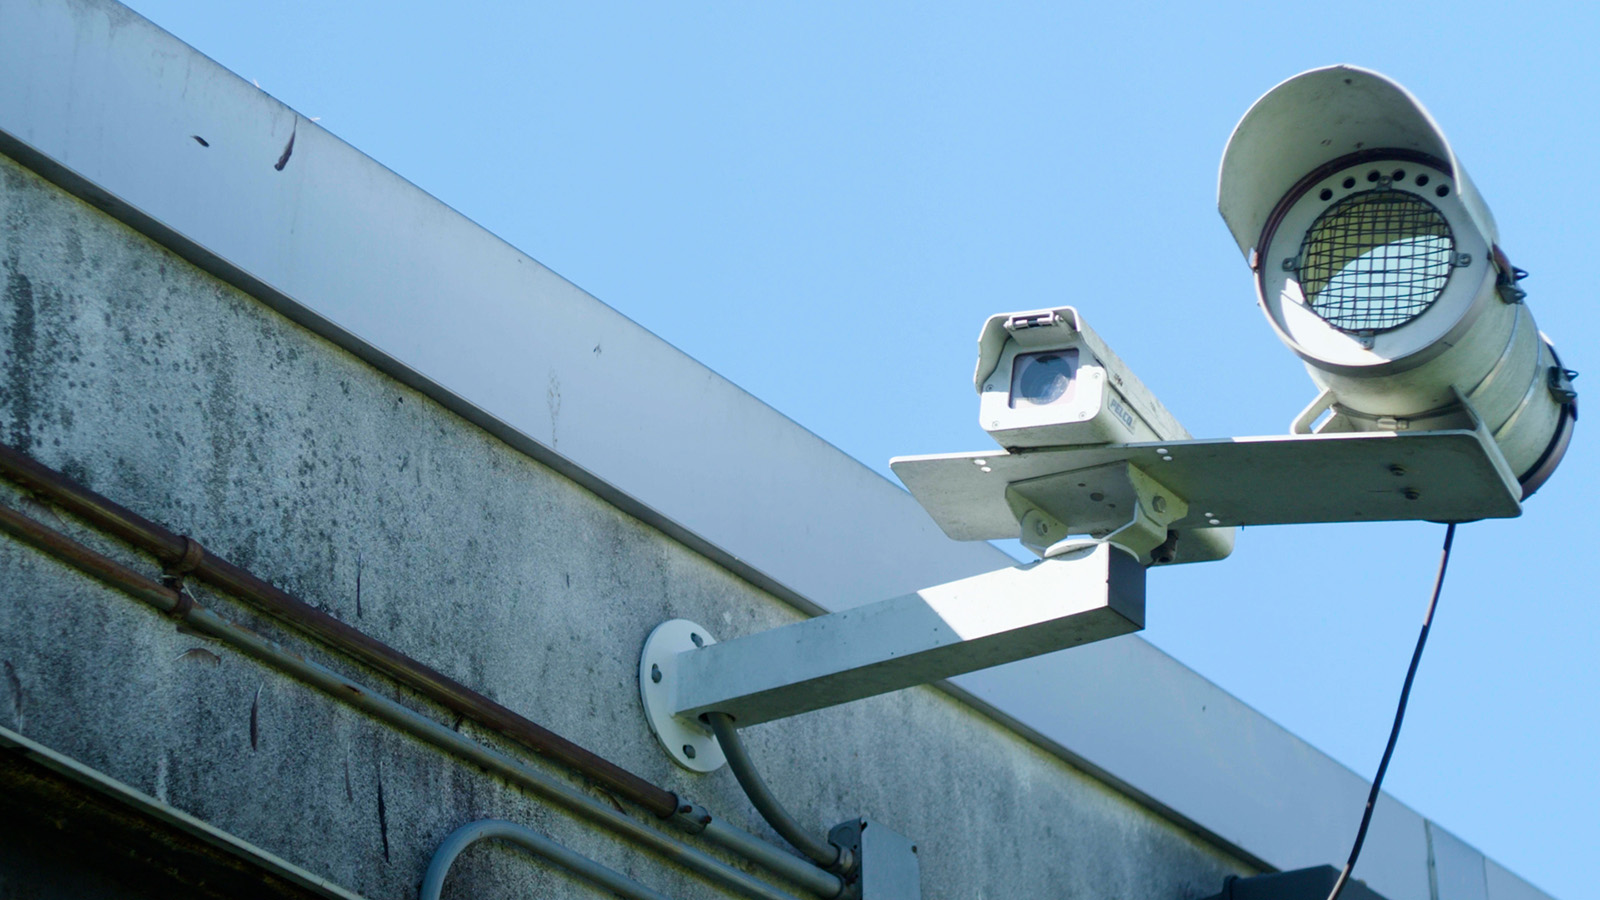 video camera mounted on prison roof